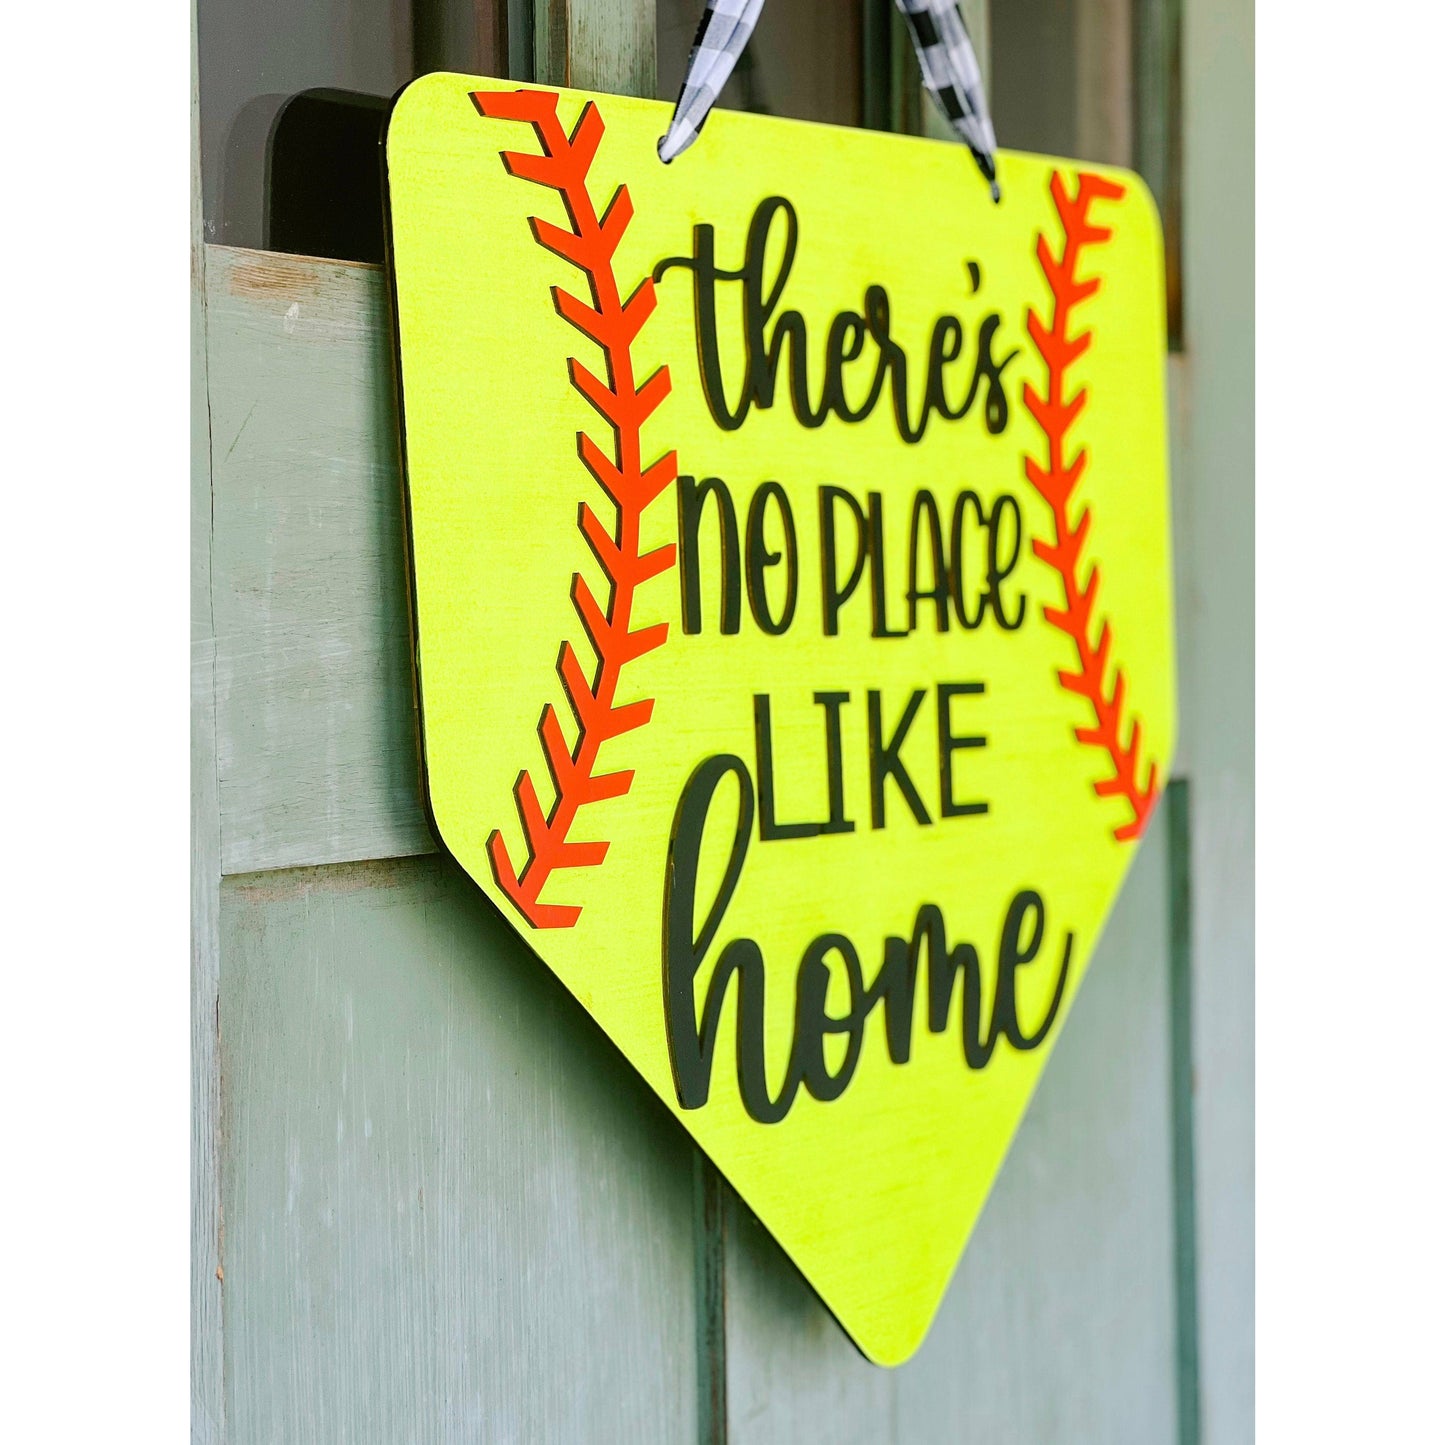 Front Door Sign, Softball Door Hanger, No Place Like Home, Fathers Day Gift from Daughter, Dad Gift